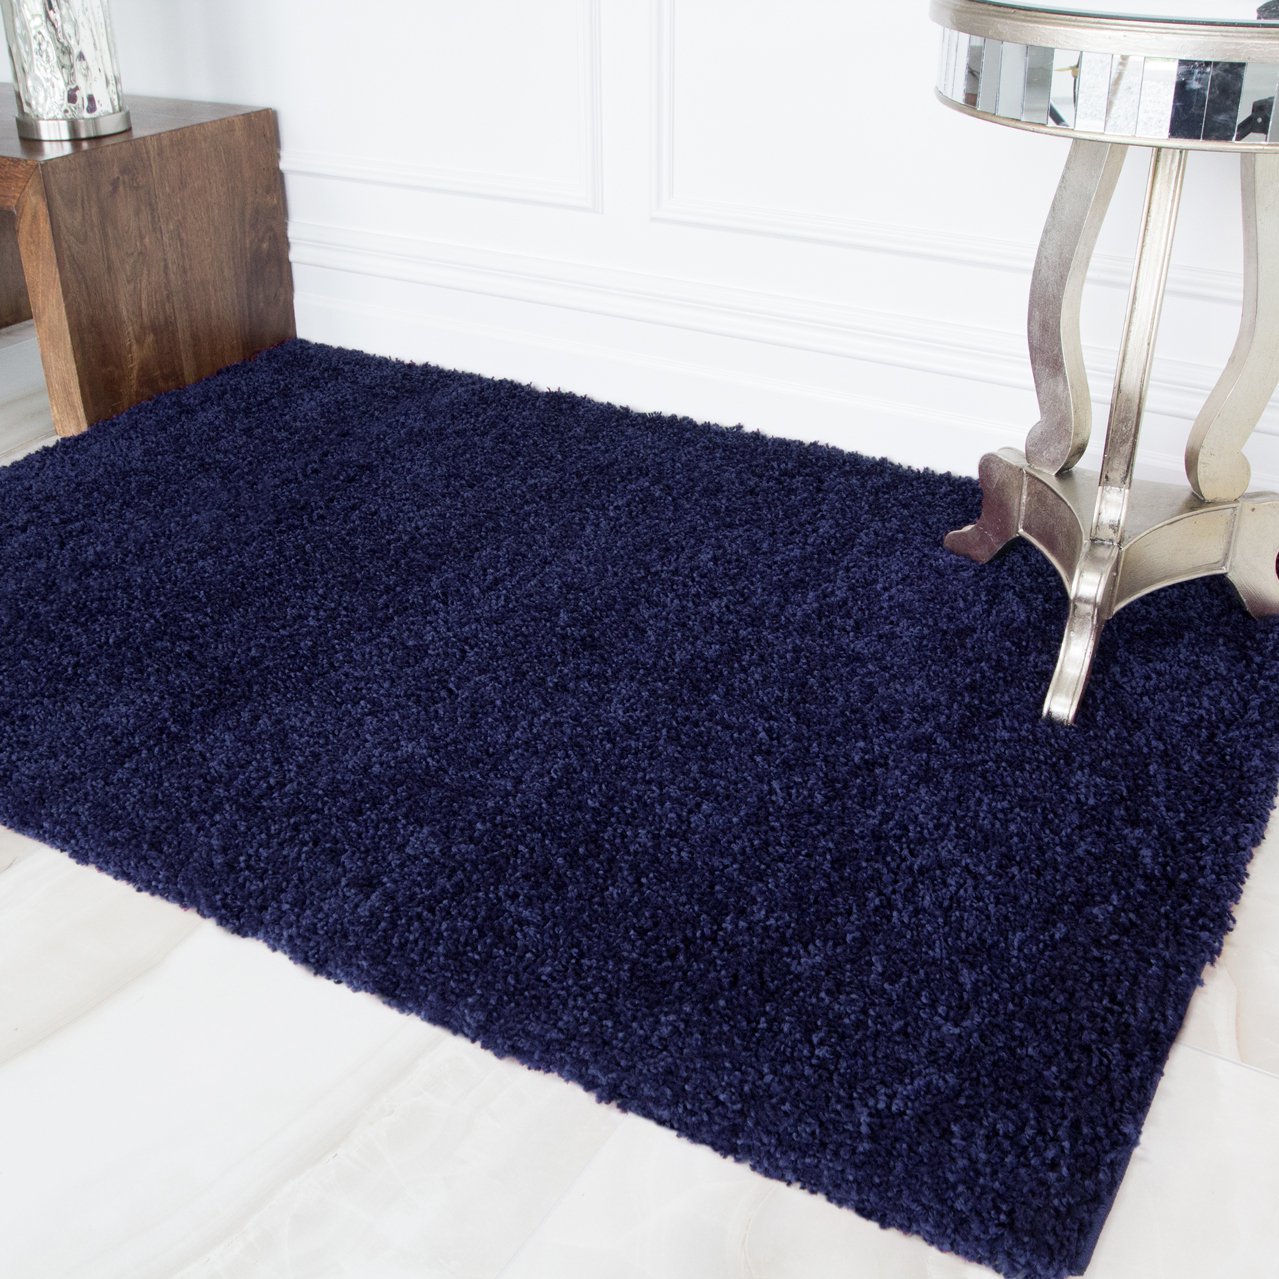 Navy Blue Shaggy Rug - Vancouver